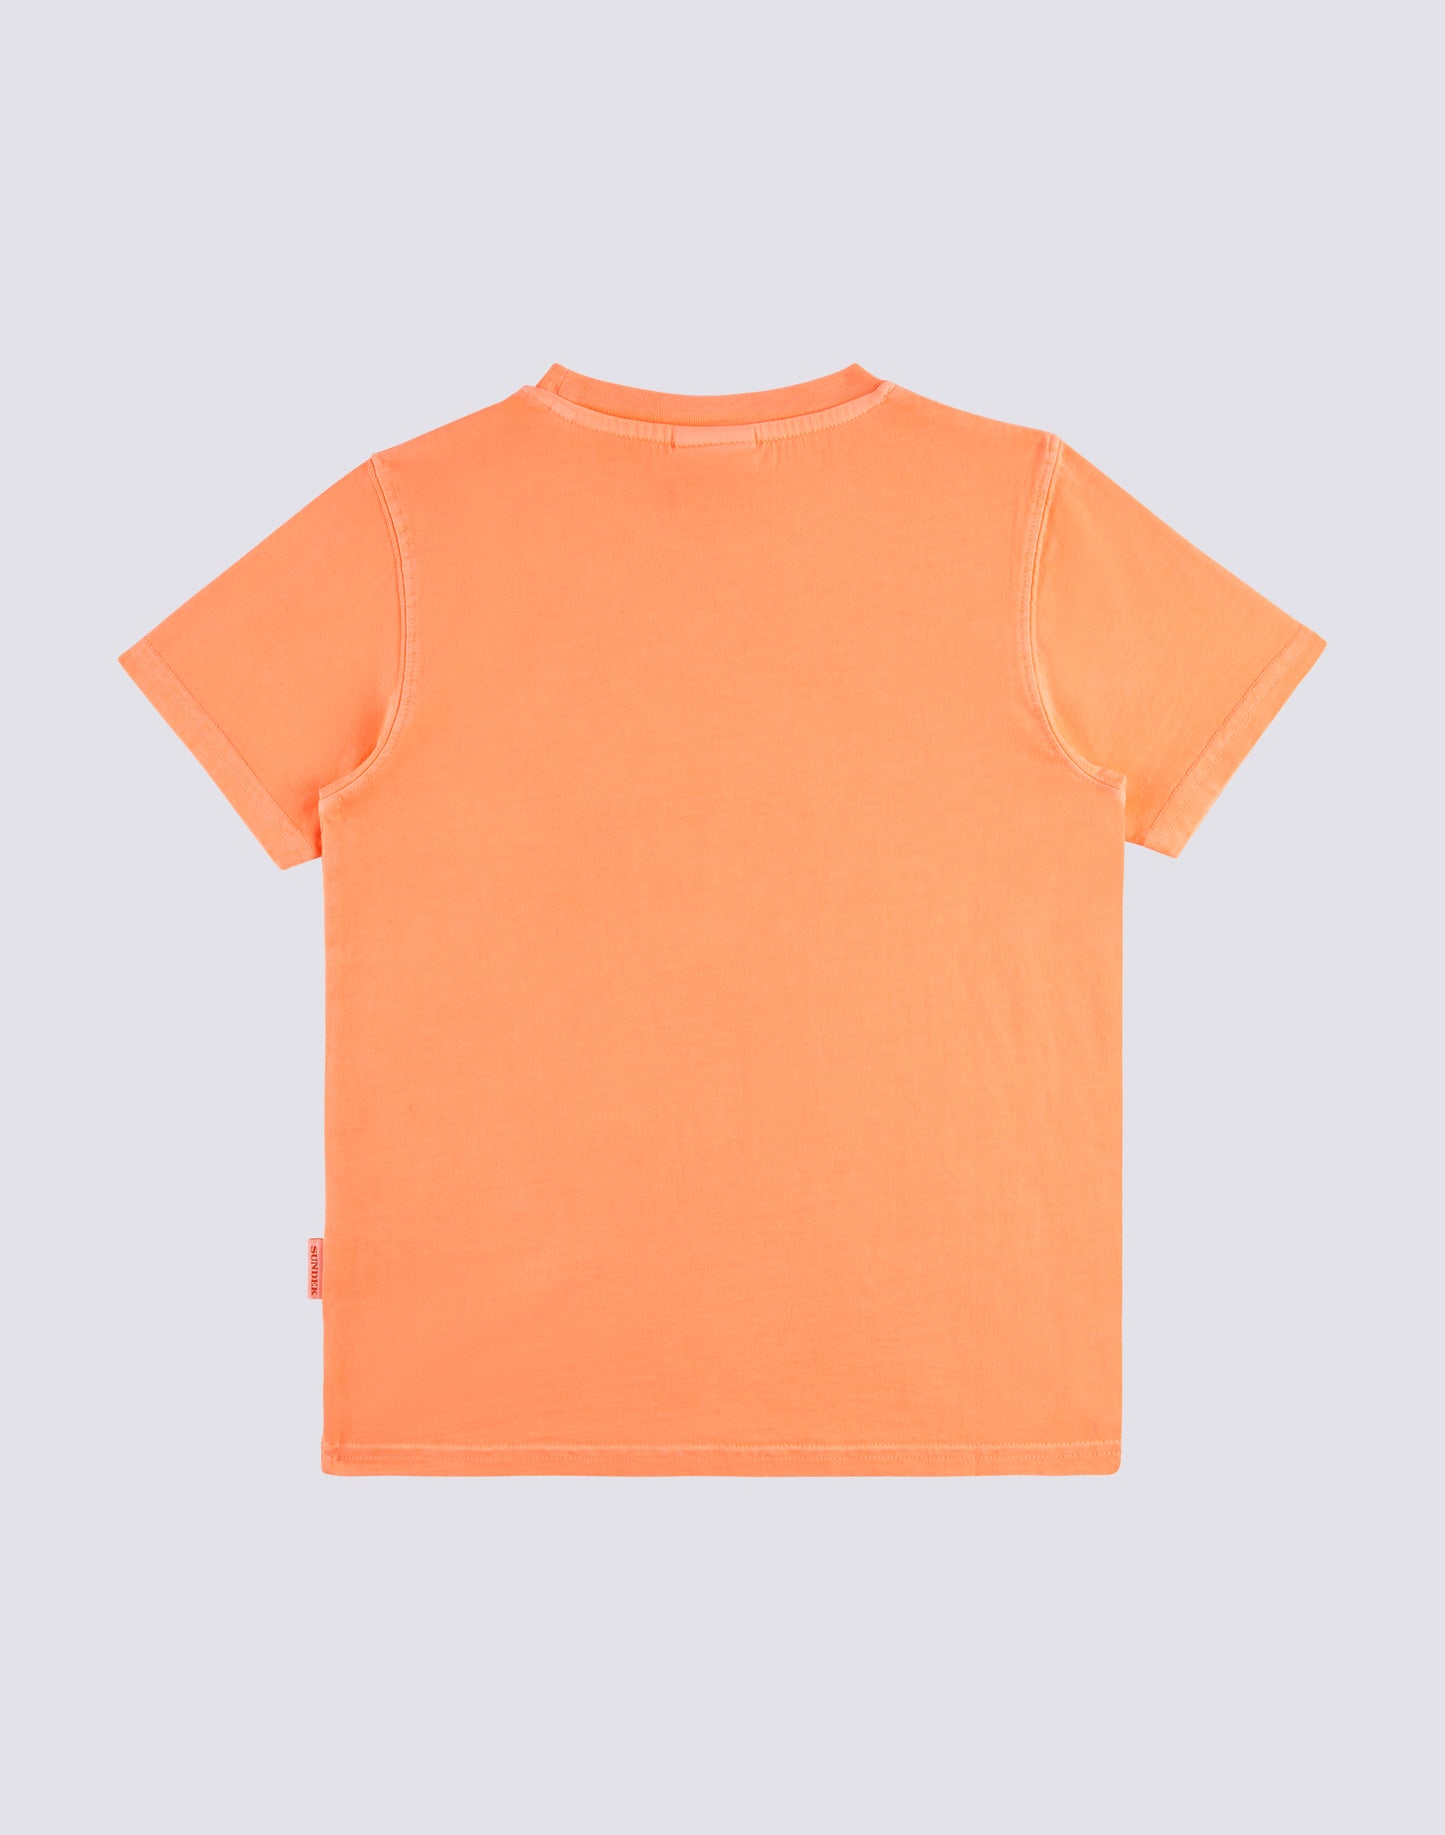 SHORT SLEEVE T-SHIRT IN OVERDYED COTTON